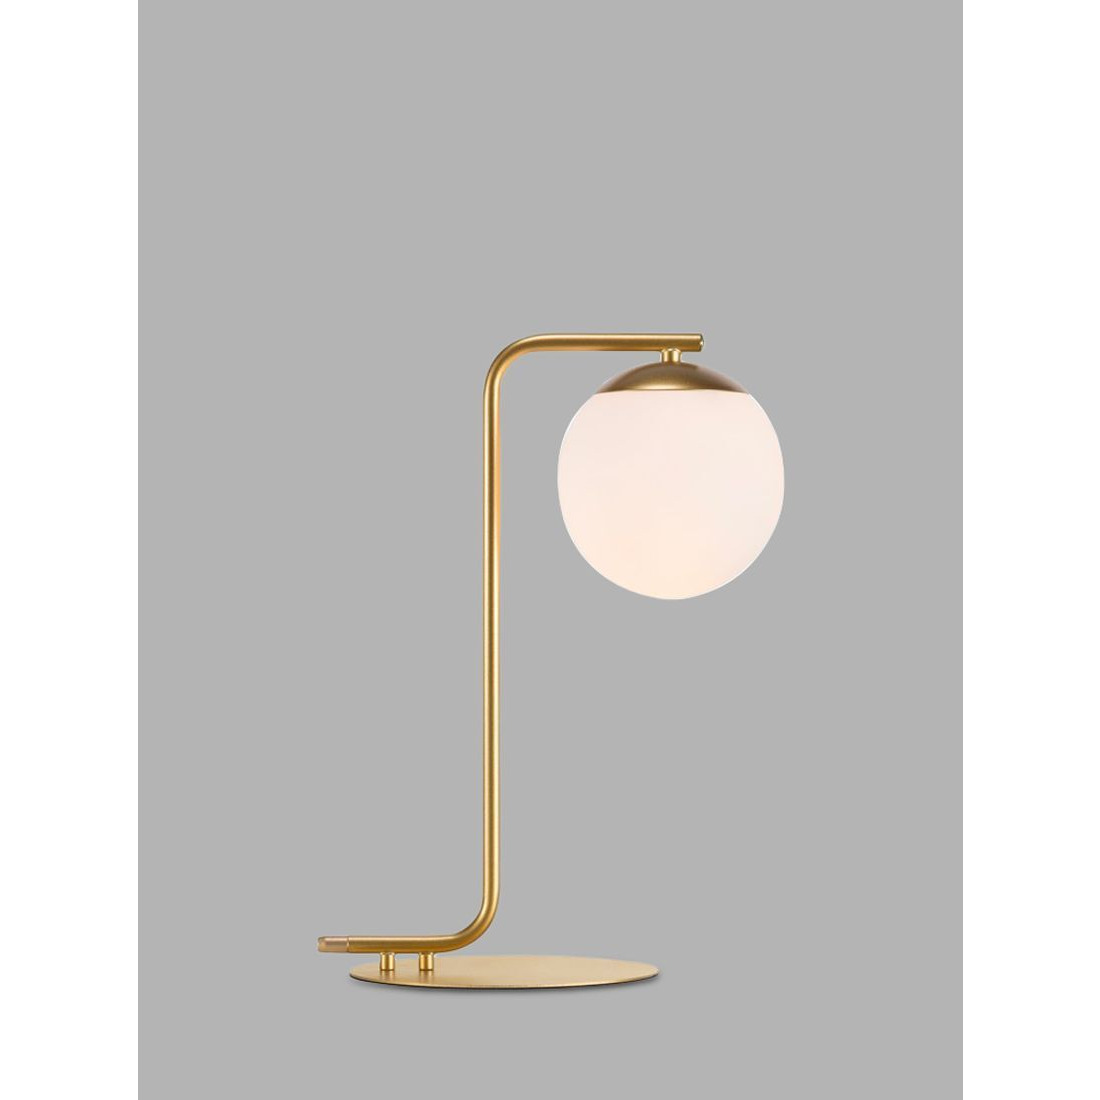 Nordlux Grant Table Lamp, White/Brass - image 1